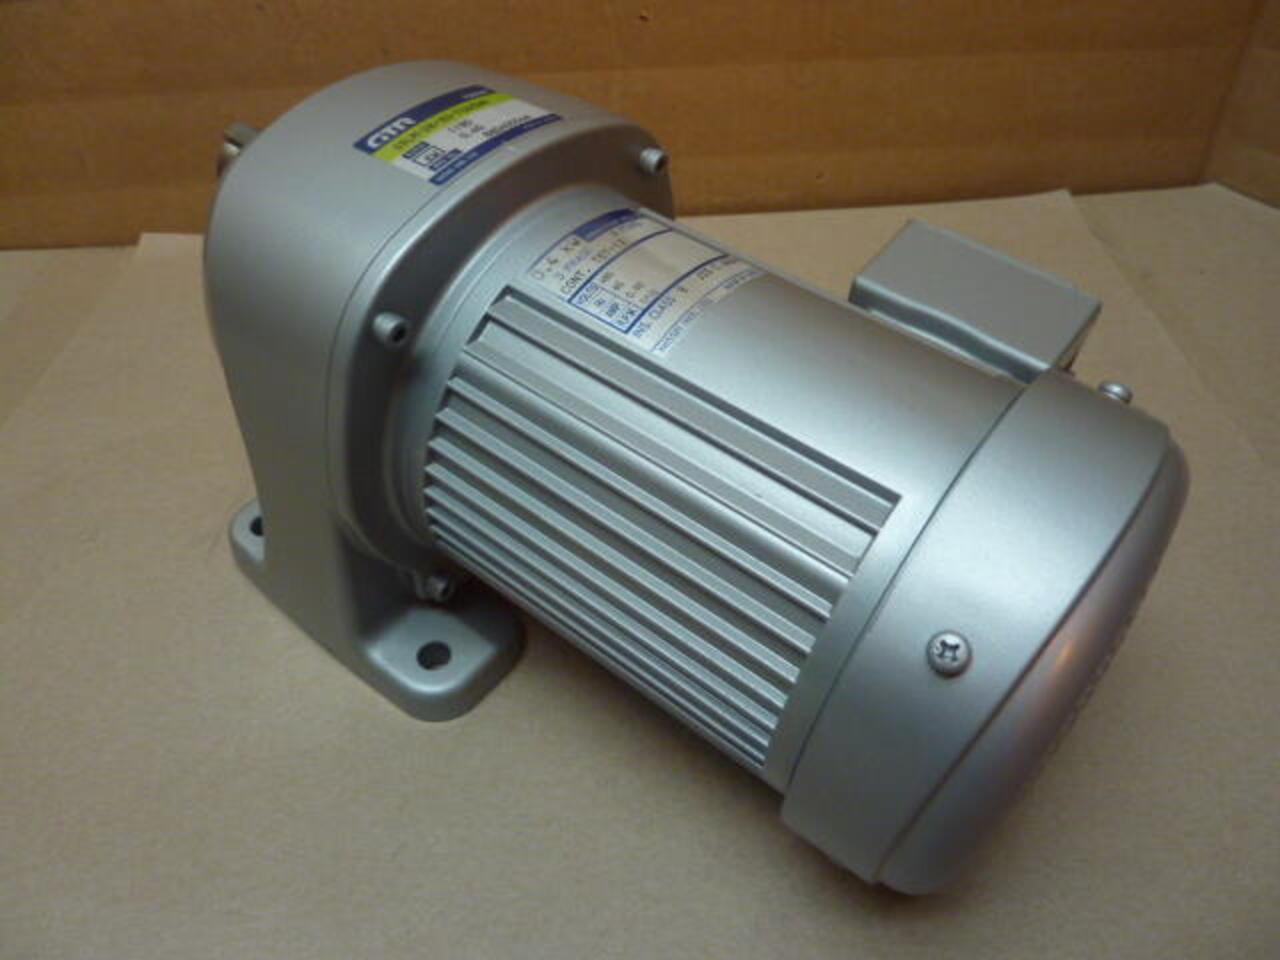 Details about   GTR MOTOR Induction Motor G3LE-40-100-075 Used #107400 